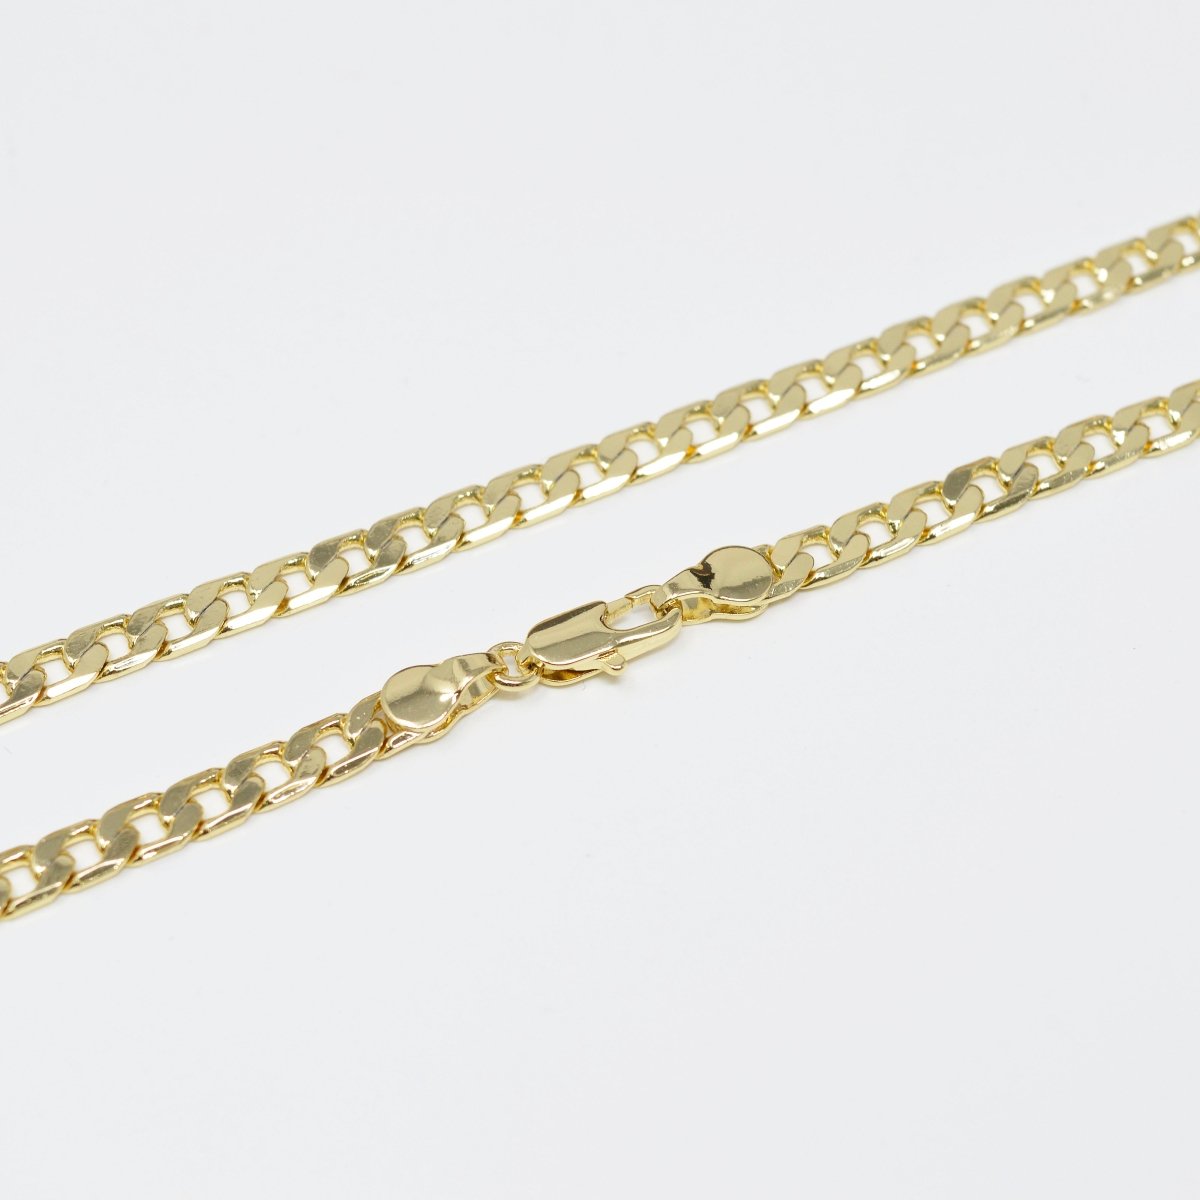 19.5 inch Ready to Use 14K Gold Filled Miami Cuban Curb Necklace Chain, Layering Chain, 5mm Curb Necklace w/ lobster Clasp | CN-1007 - DLUXCA